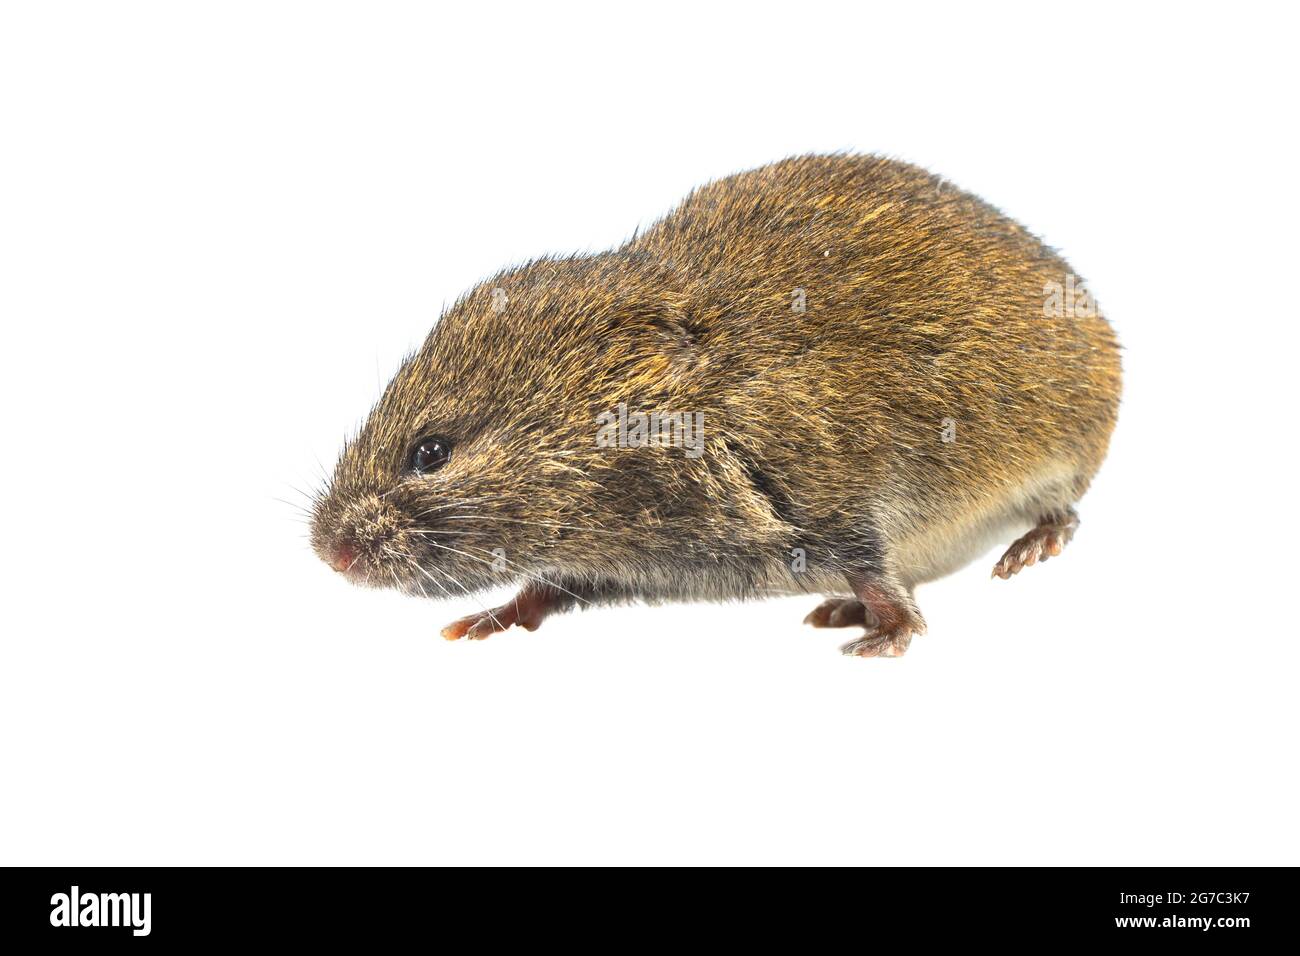 Field vole or short-tailed vole (Microtus agrestis). Small vole with brown fur walking on white background Stock Photo